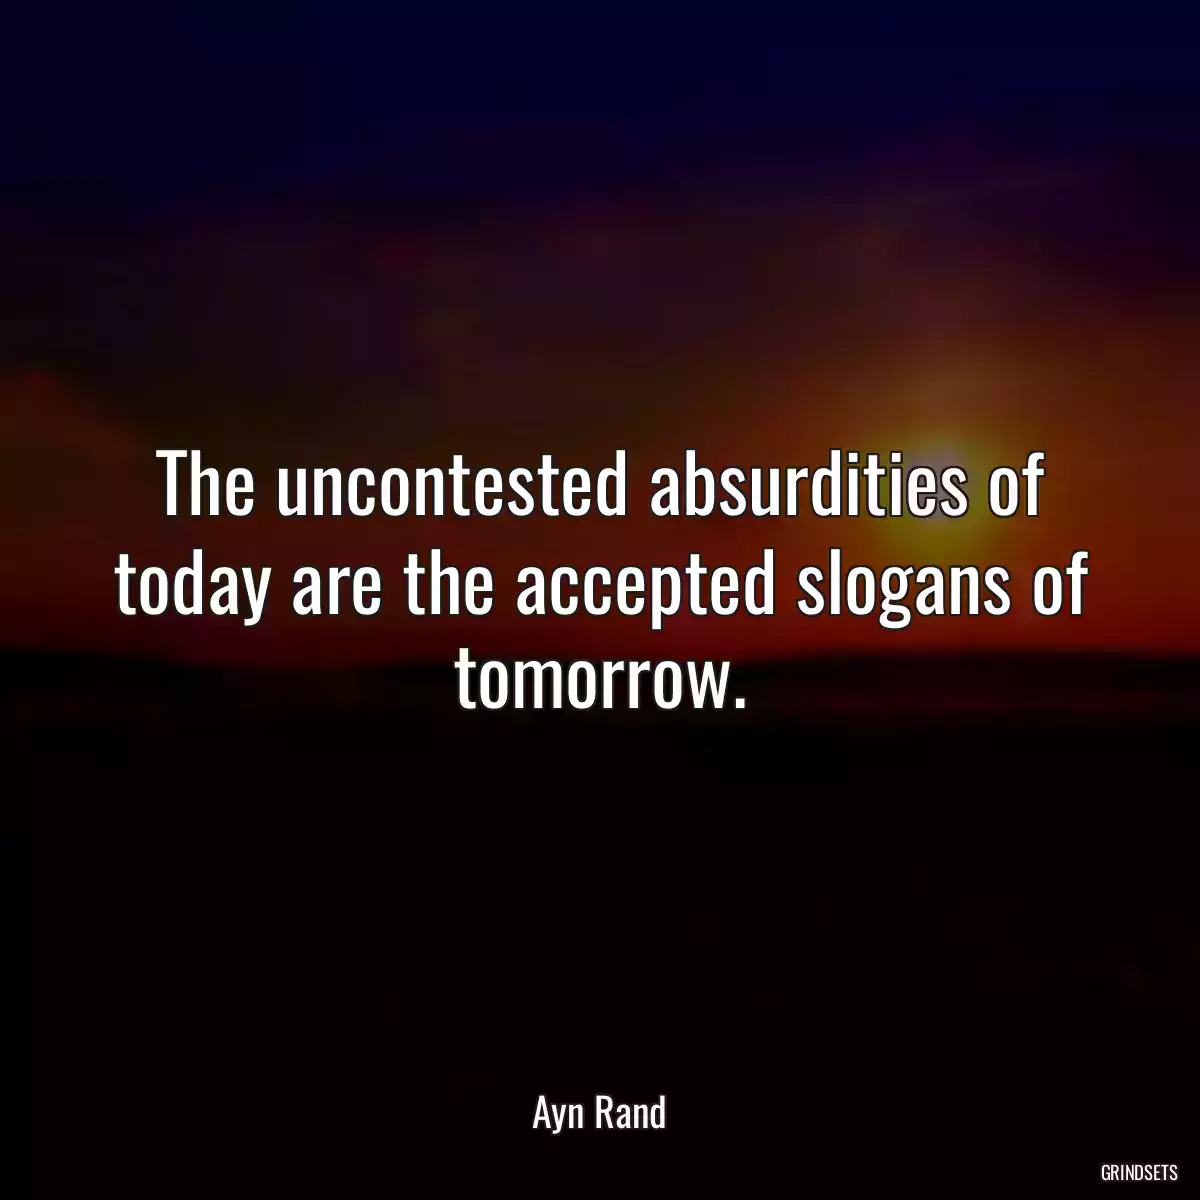 The uncontested absurdities of today are the accepted slogans of tomorrow.